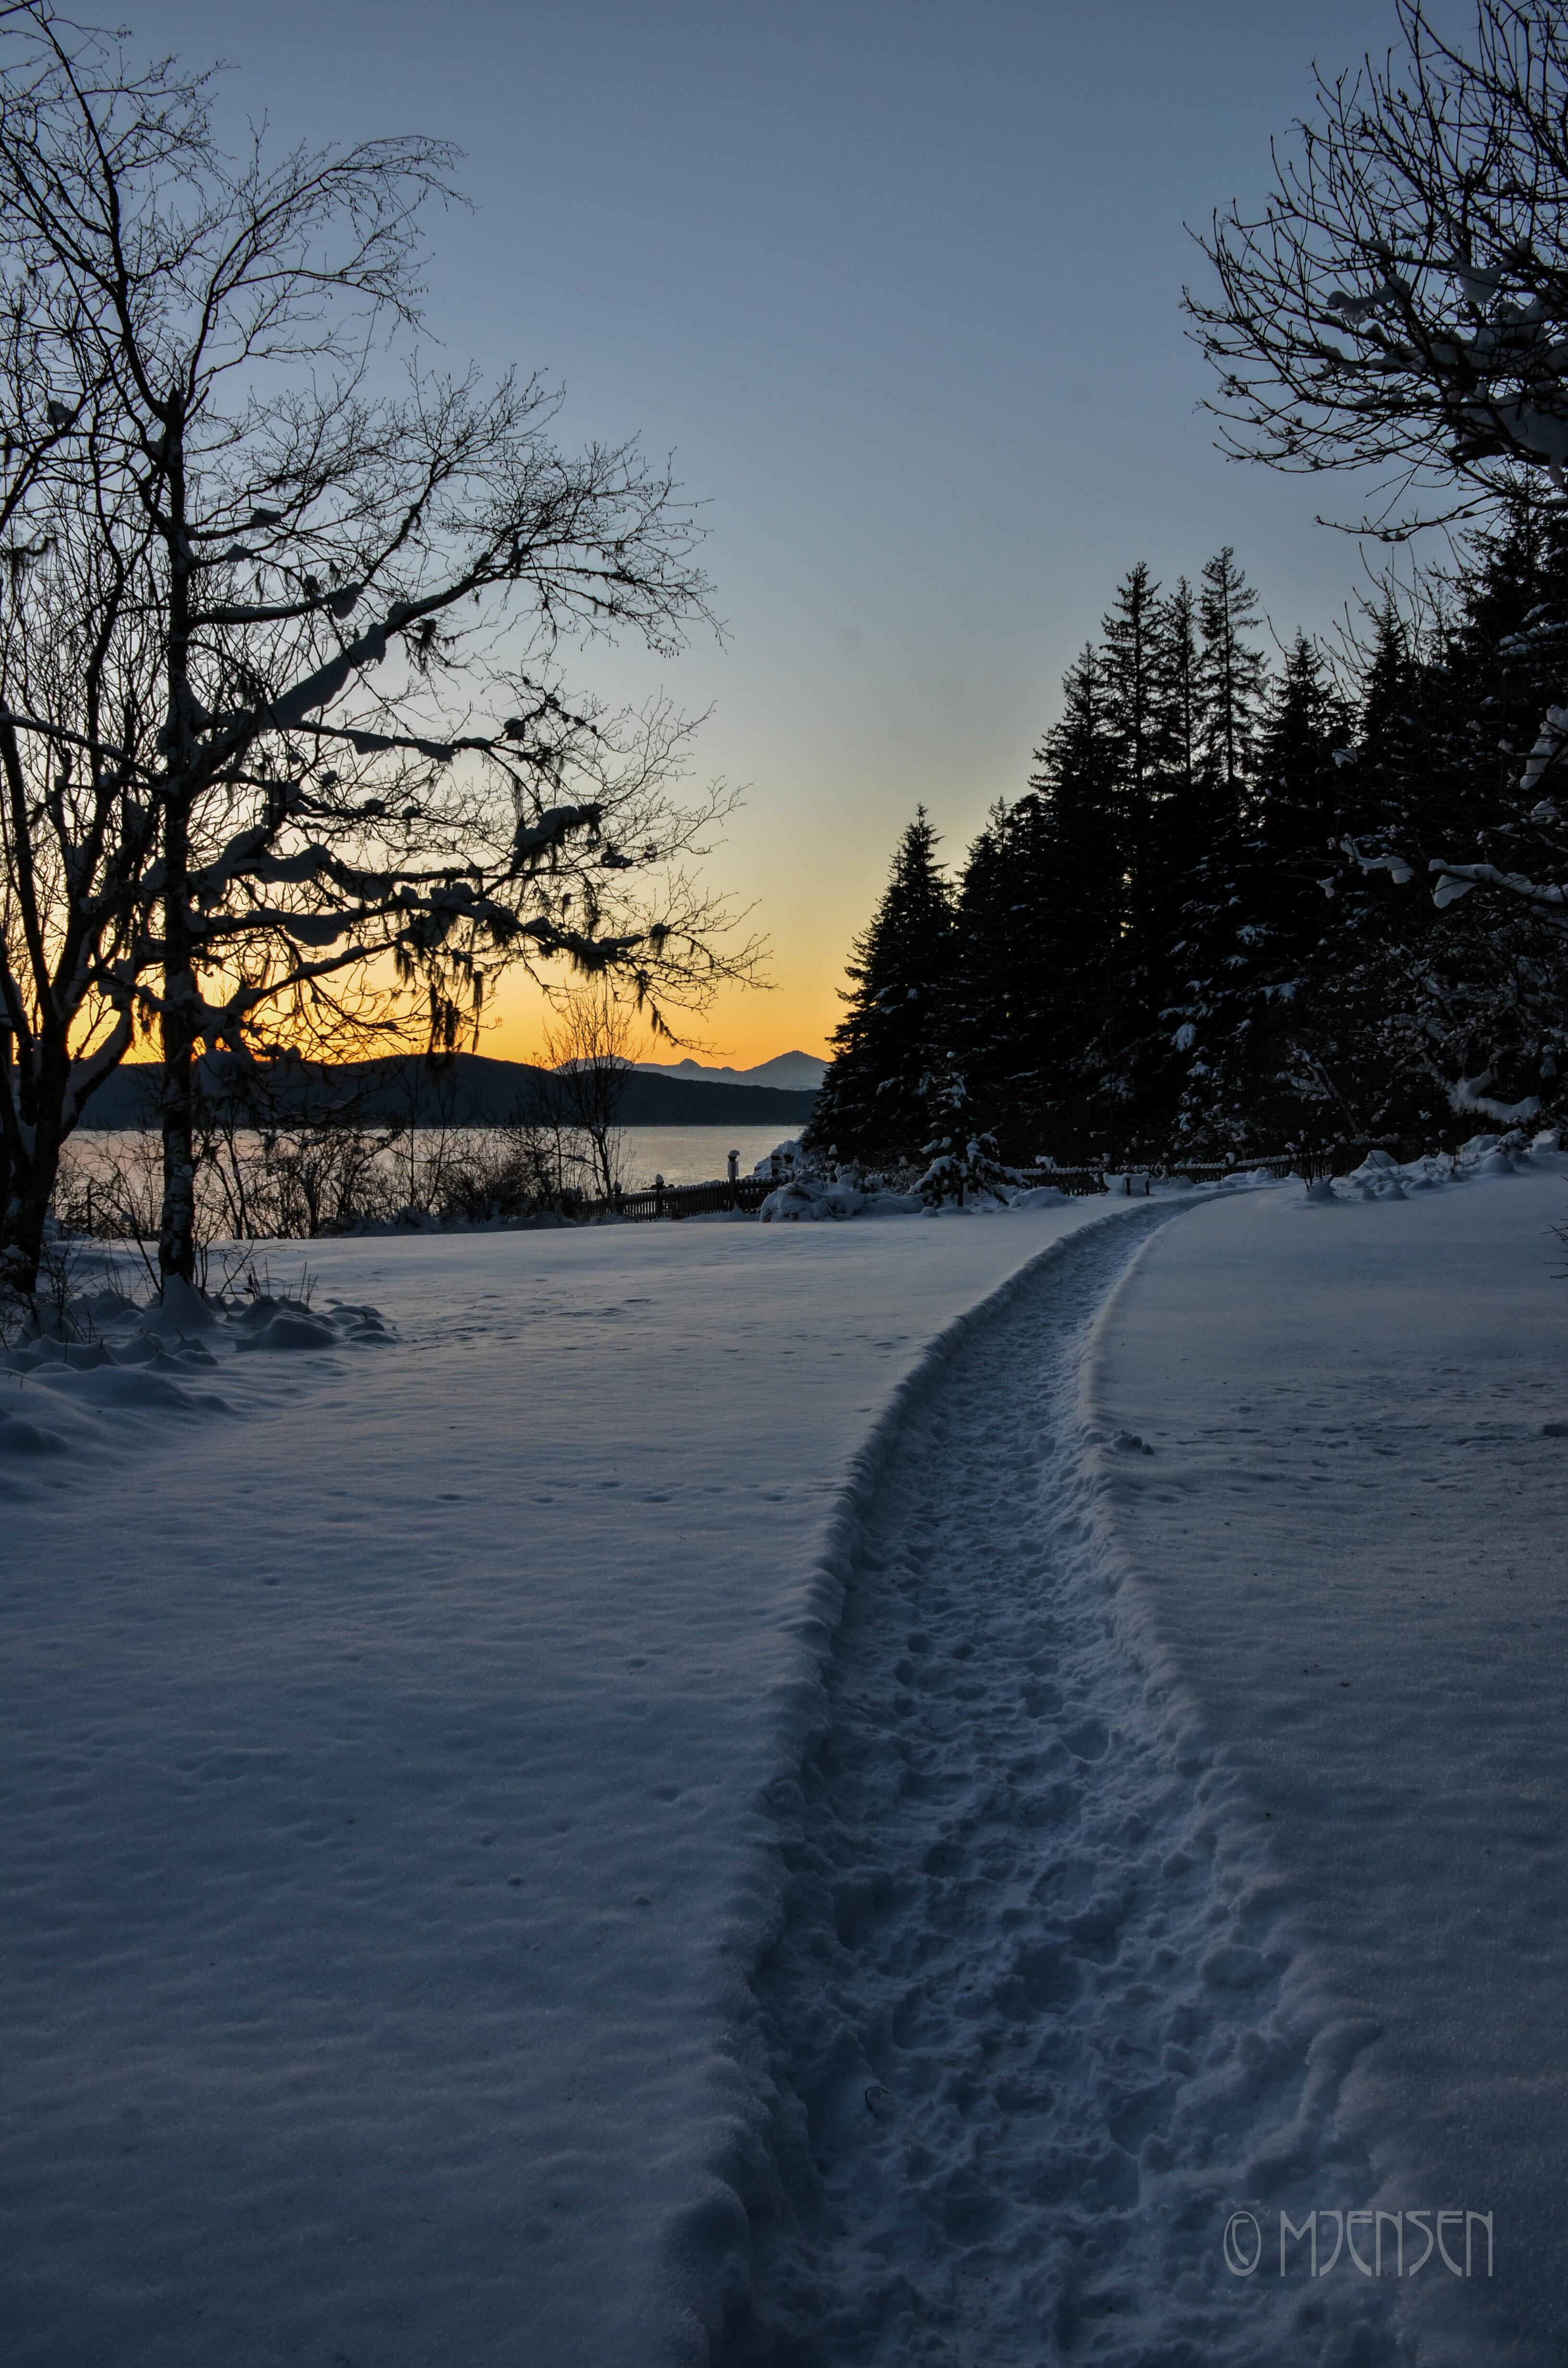 Winter sunset with a path through the snow at the Arboretum.